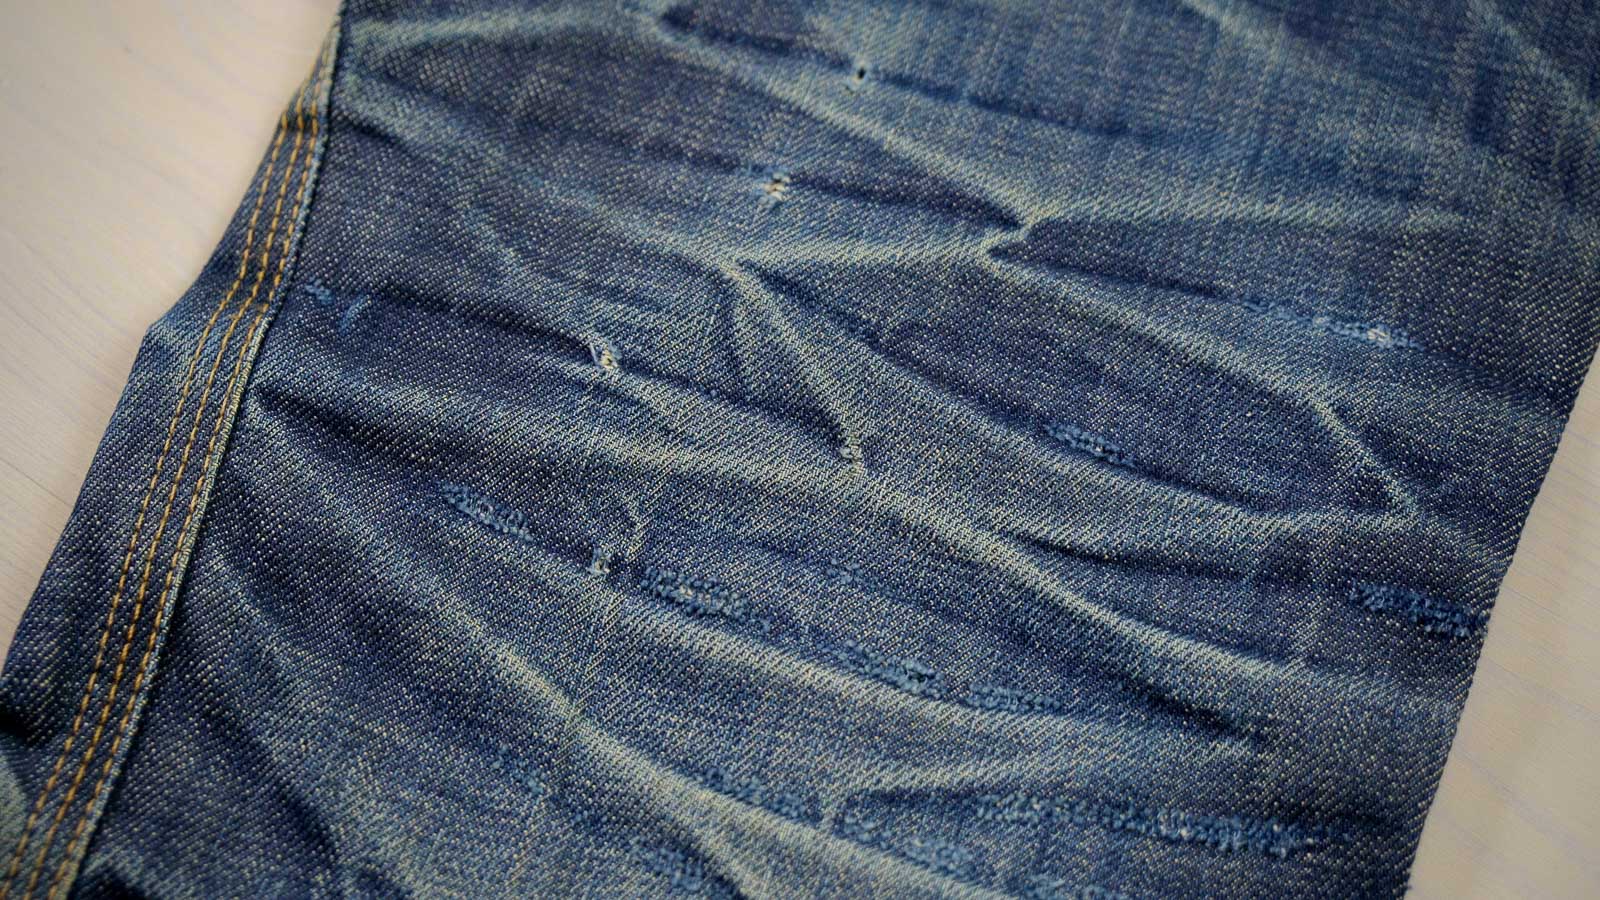 Experiencing a More Sustainable Denim Laundry